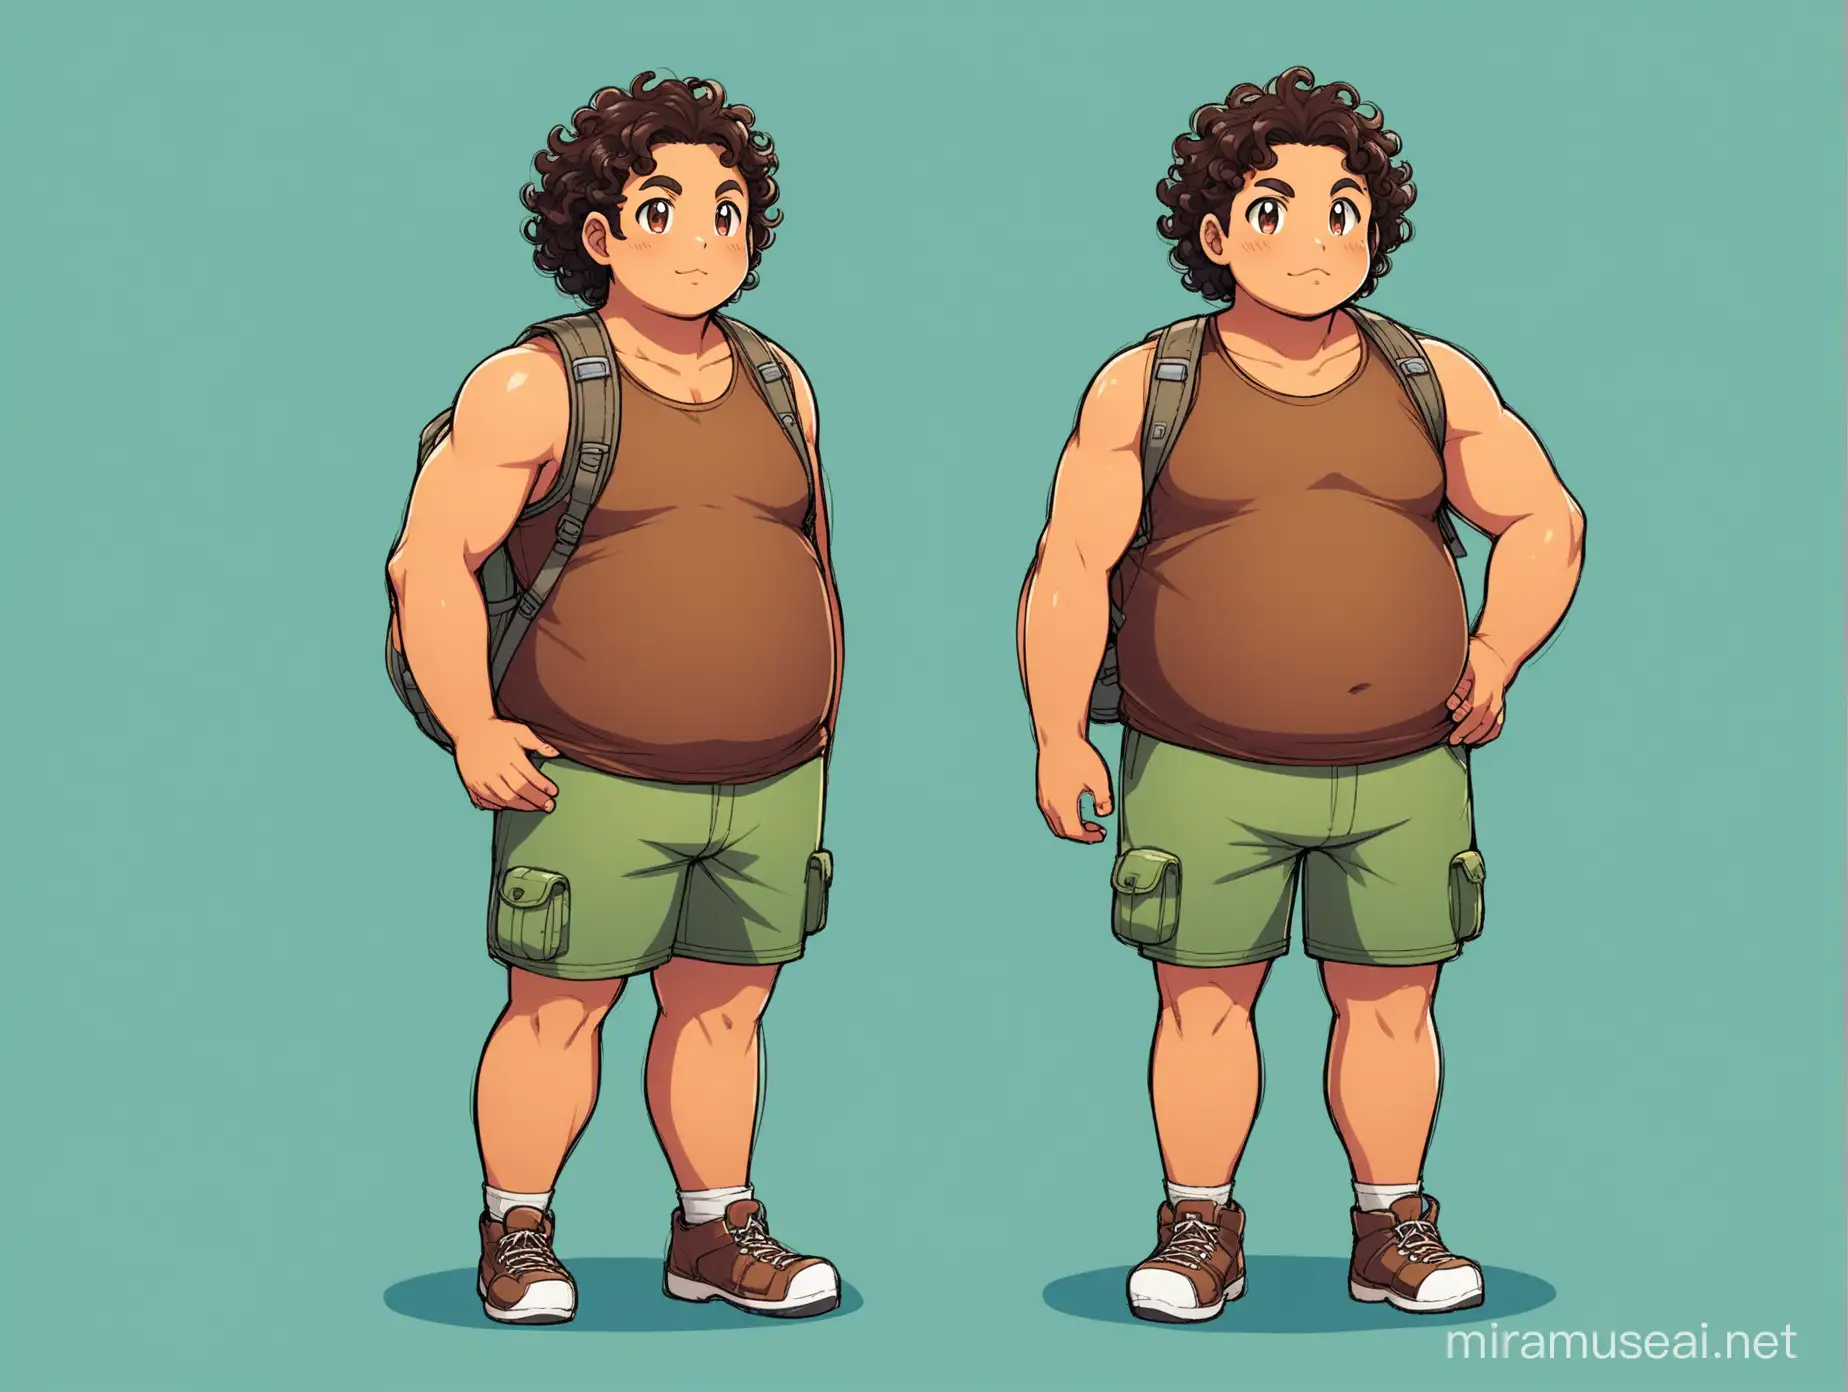 Adventurous Hiker Character with Curly Dark Brown Hair in Pokemon Anime Style